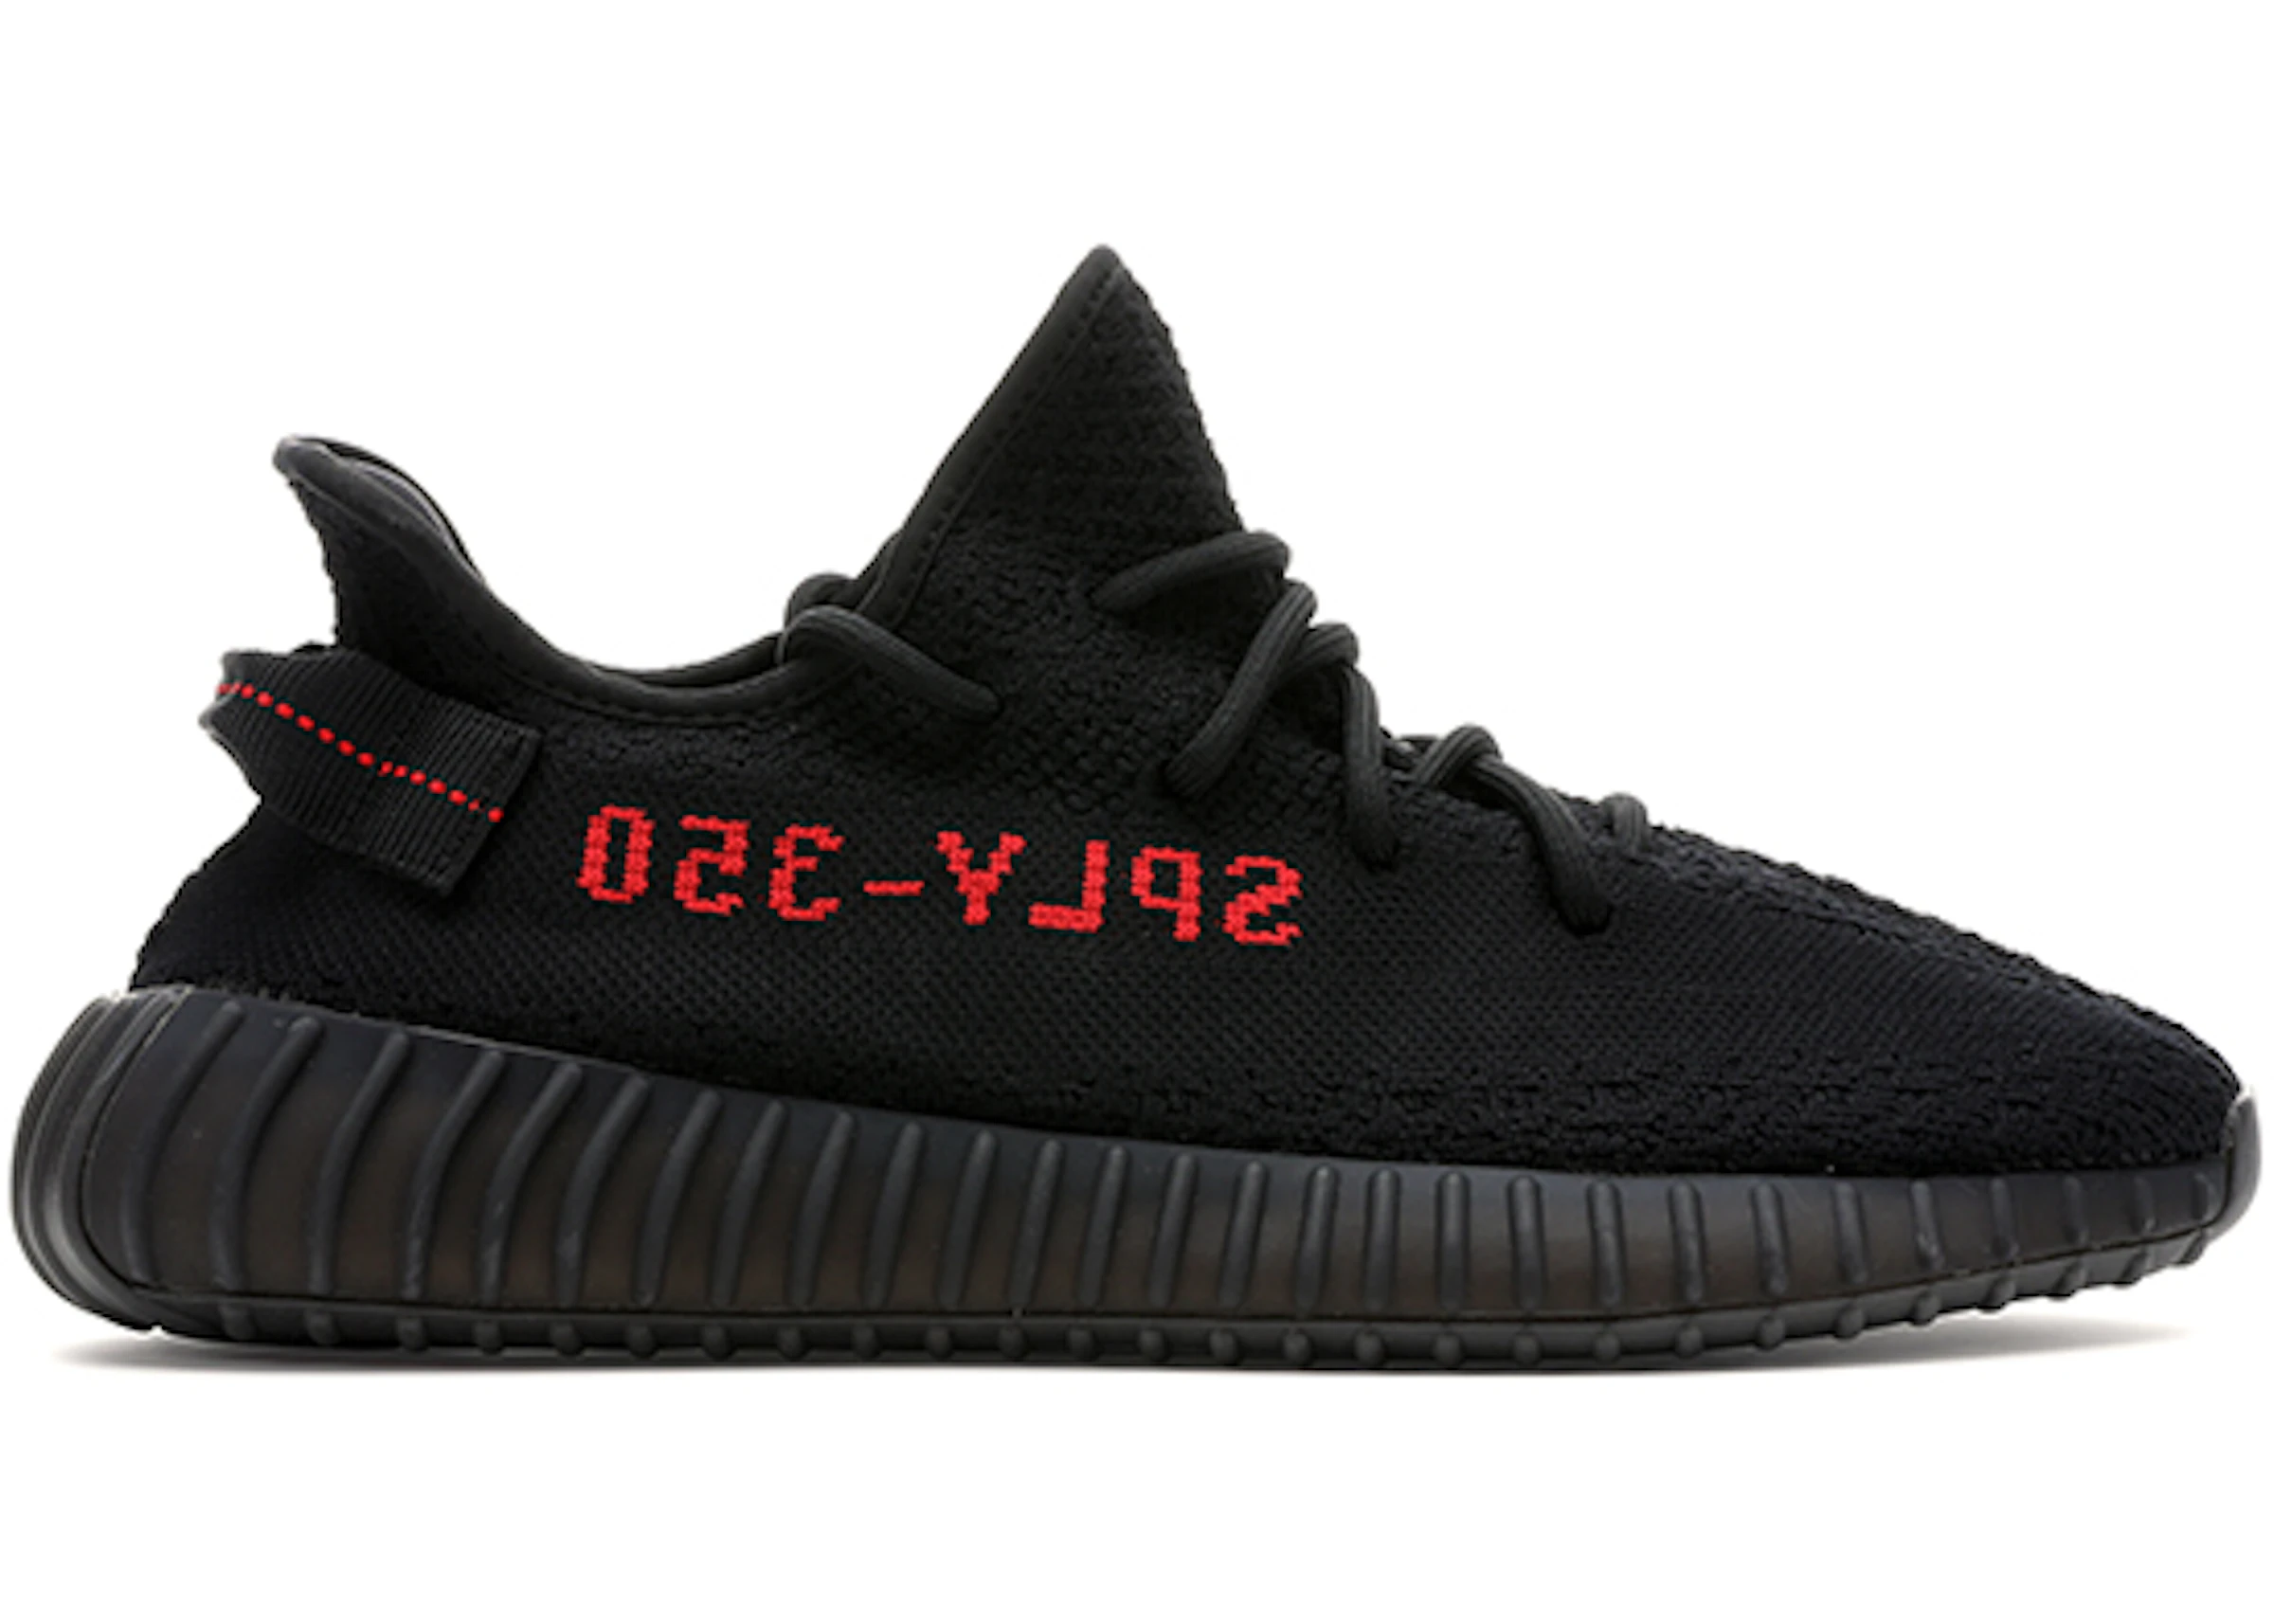 Slovenia linear Avenue adidas Yeezy Boost 350 V2 Black Red (2017/2020) - CP9652 - US